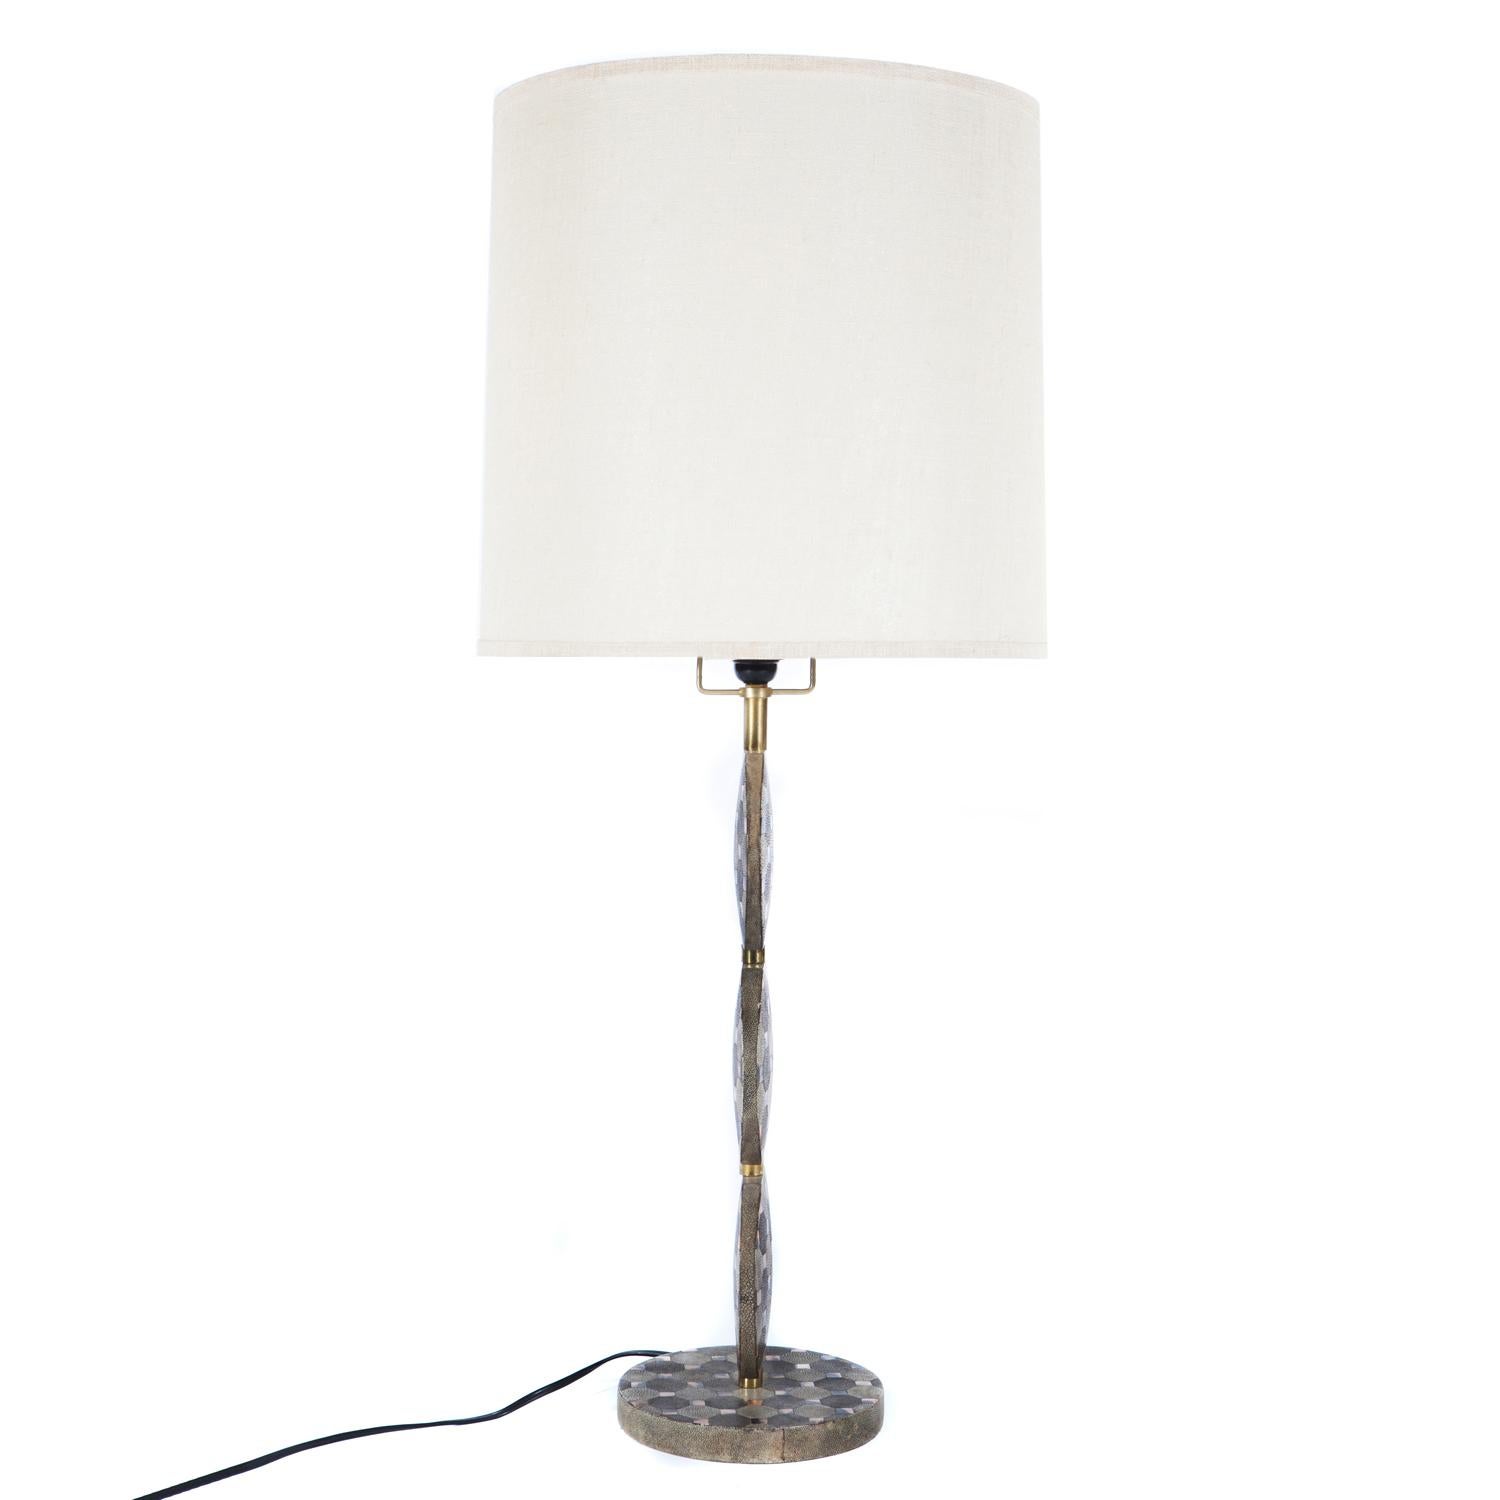 Modern Sculptural Table Lamp in Shagreen and Horn with Brass Fittings, 1980s For Sale